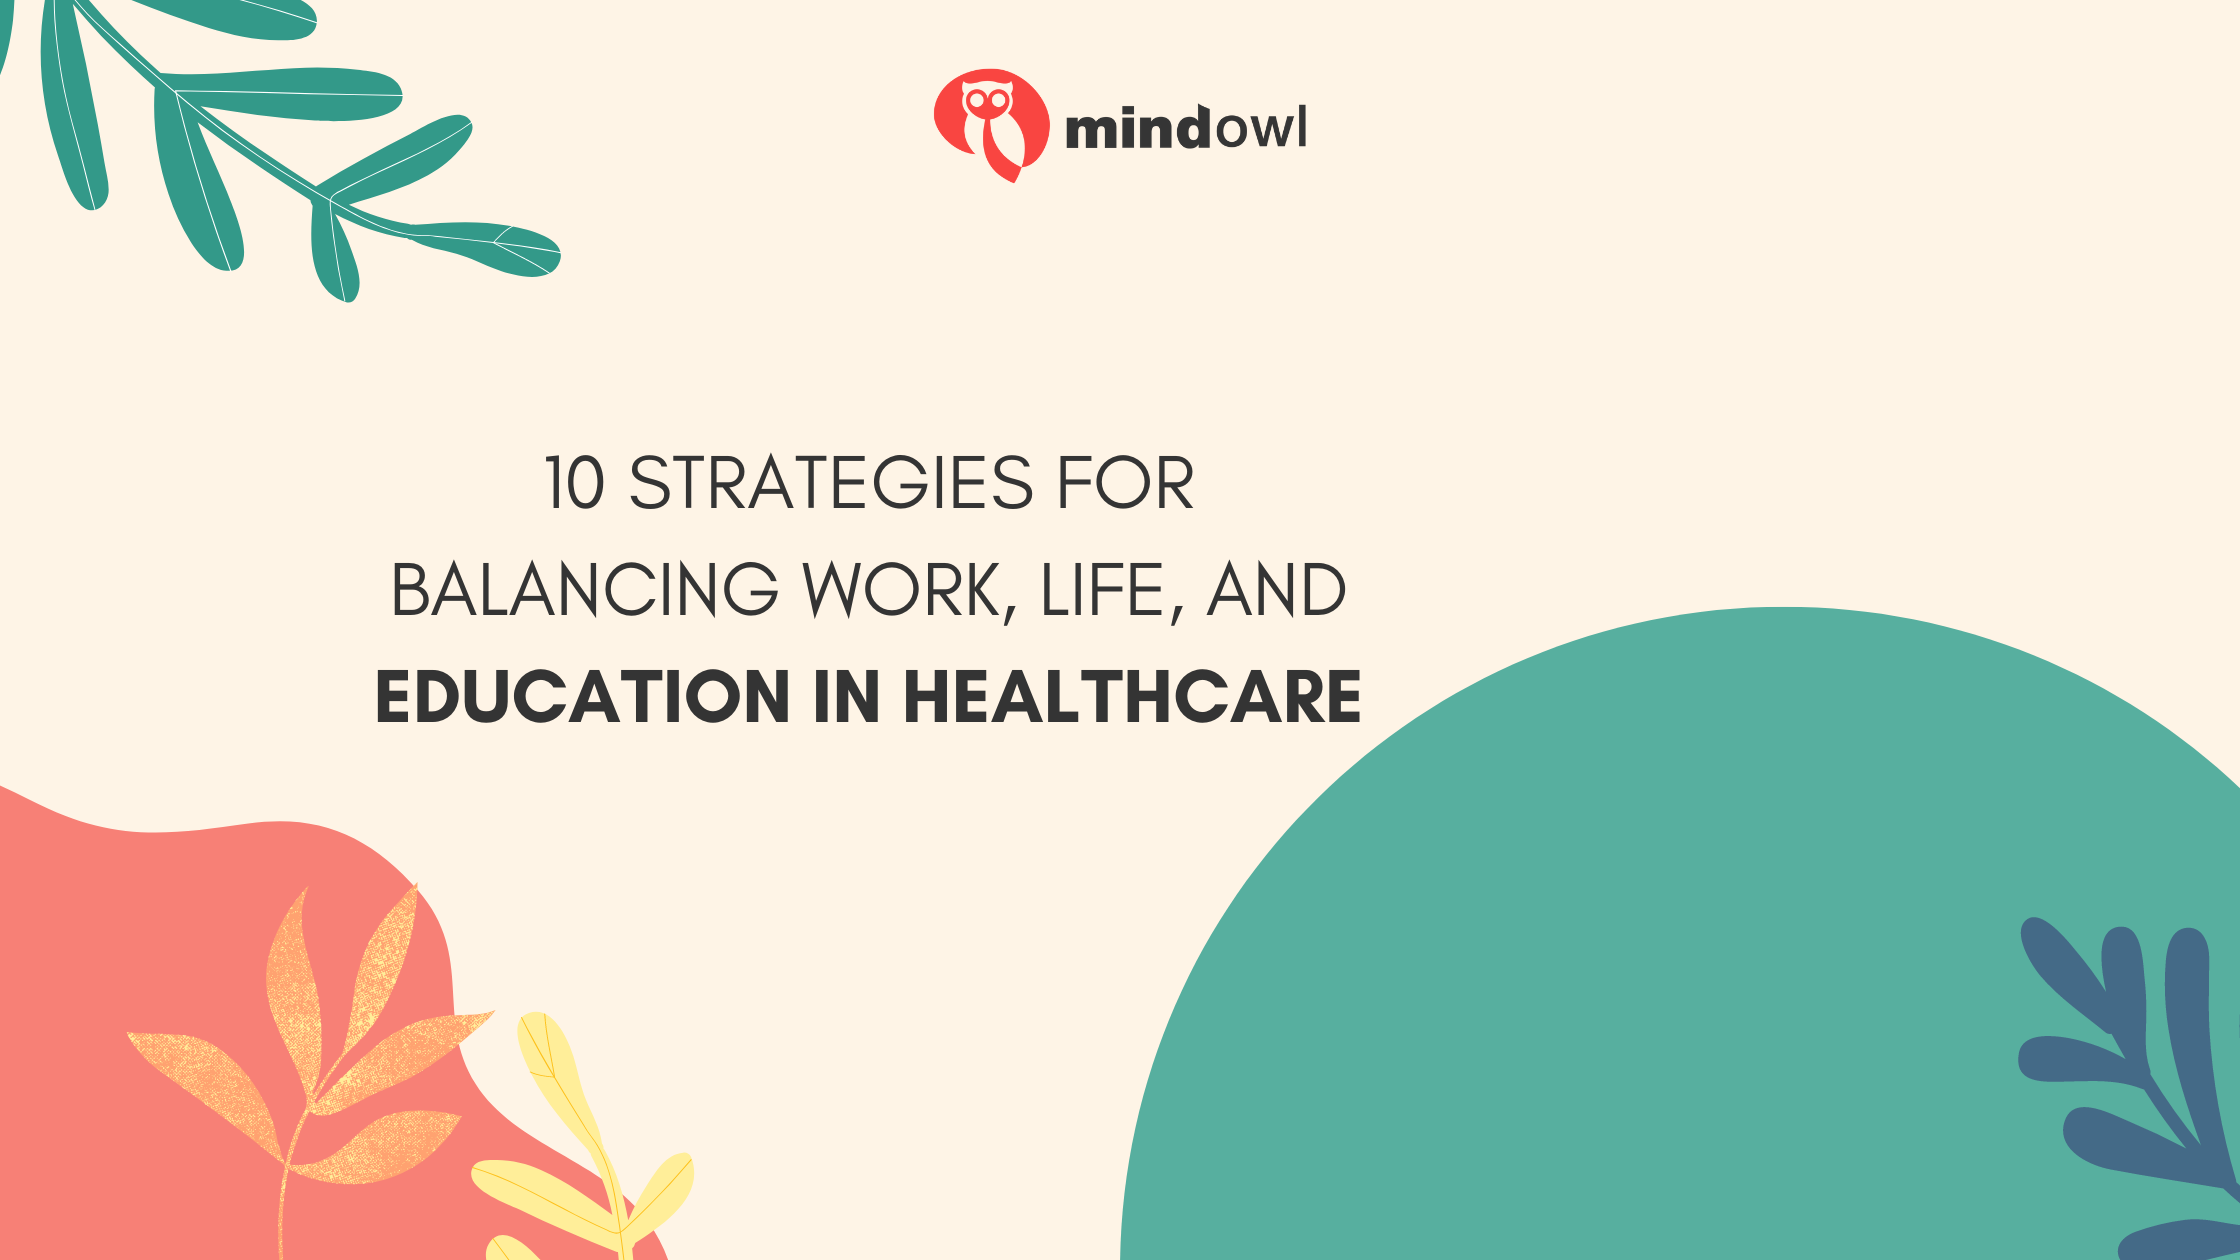 10 Strategies for Balancing Work, Life, and Education in Healthcare